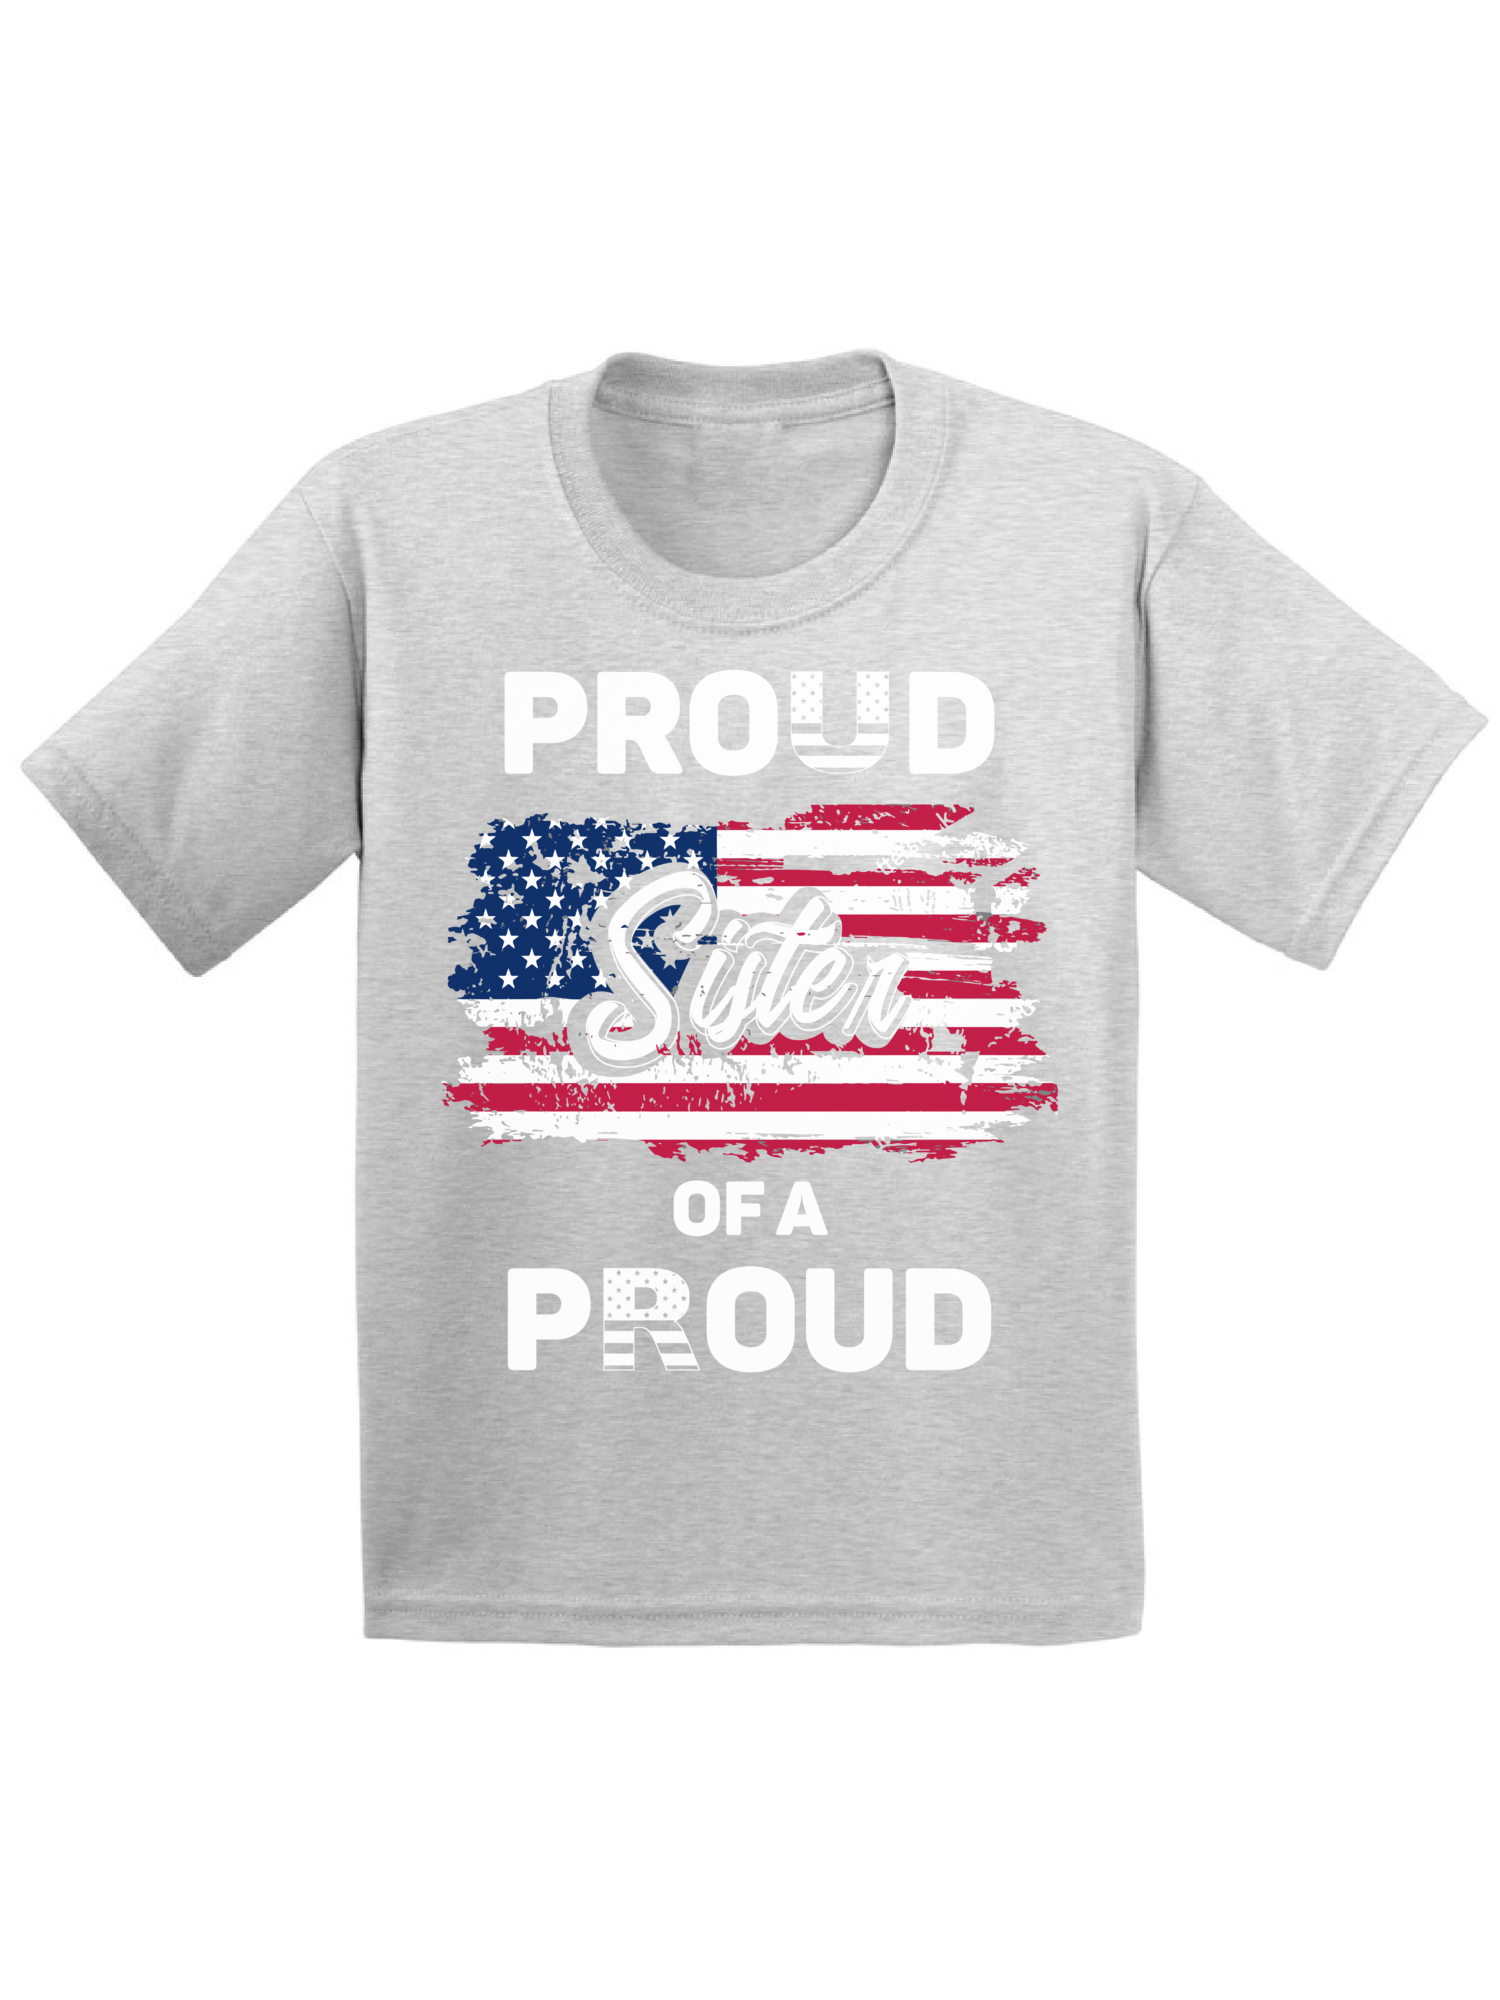 Awkward Styles Proud Sister of a Veteran Toddler Shirt Pro America T shirts for Sister Proud American USA Veteran Girls Tshirt Red White and Blue 4th of July T-shirts for Sister Love USA - image 1 of 4